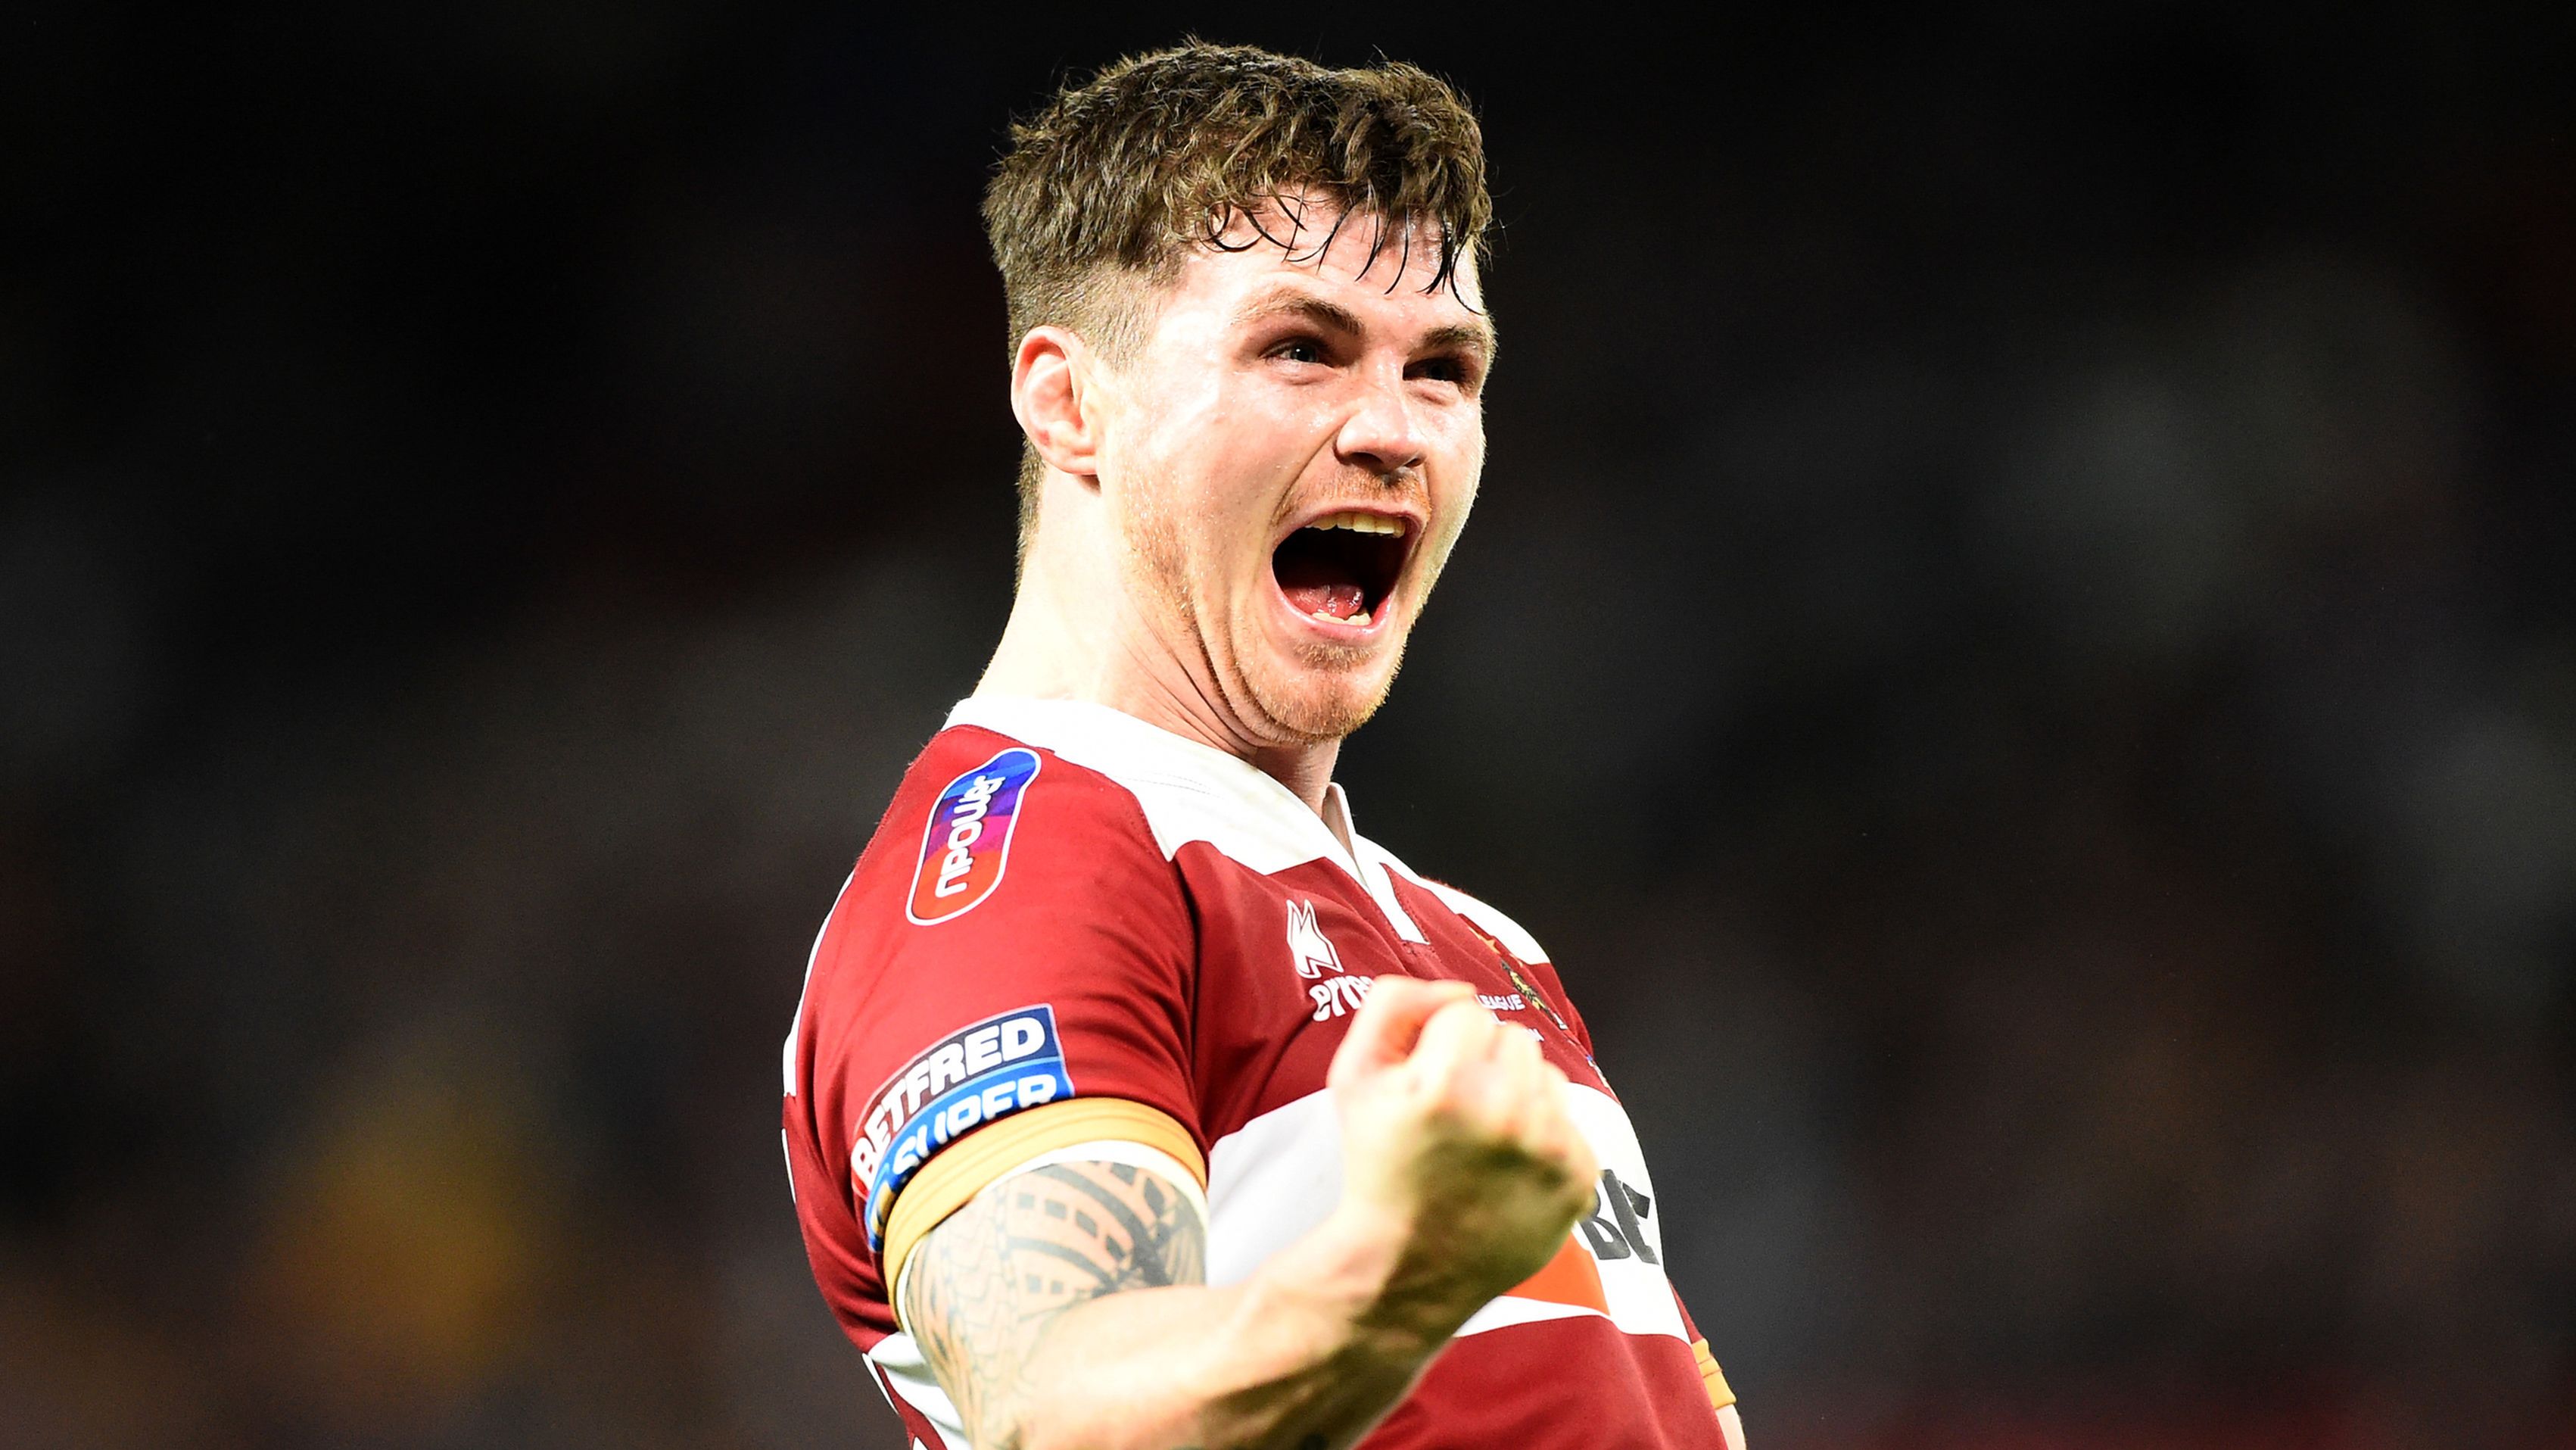 John Bateman during the BetFred Super League Grand Final between Warrington Wolves and Wigan Warriors at Old Trafford on October 13, 2018 in Manchester, England.